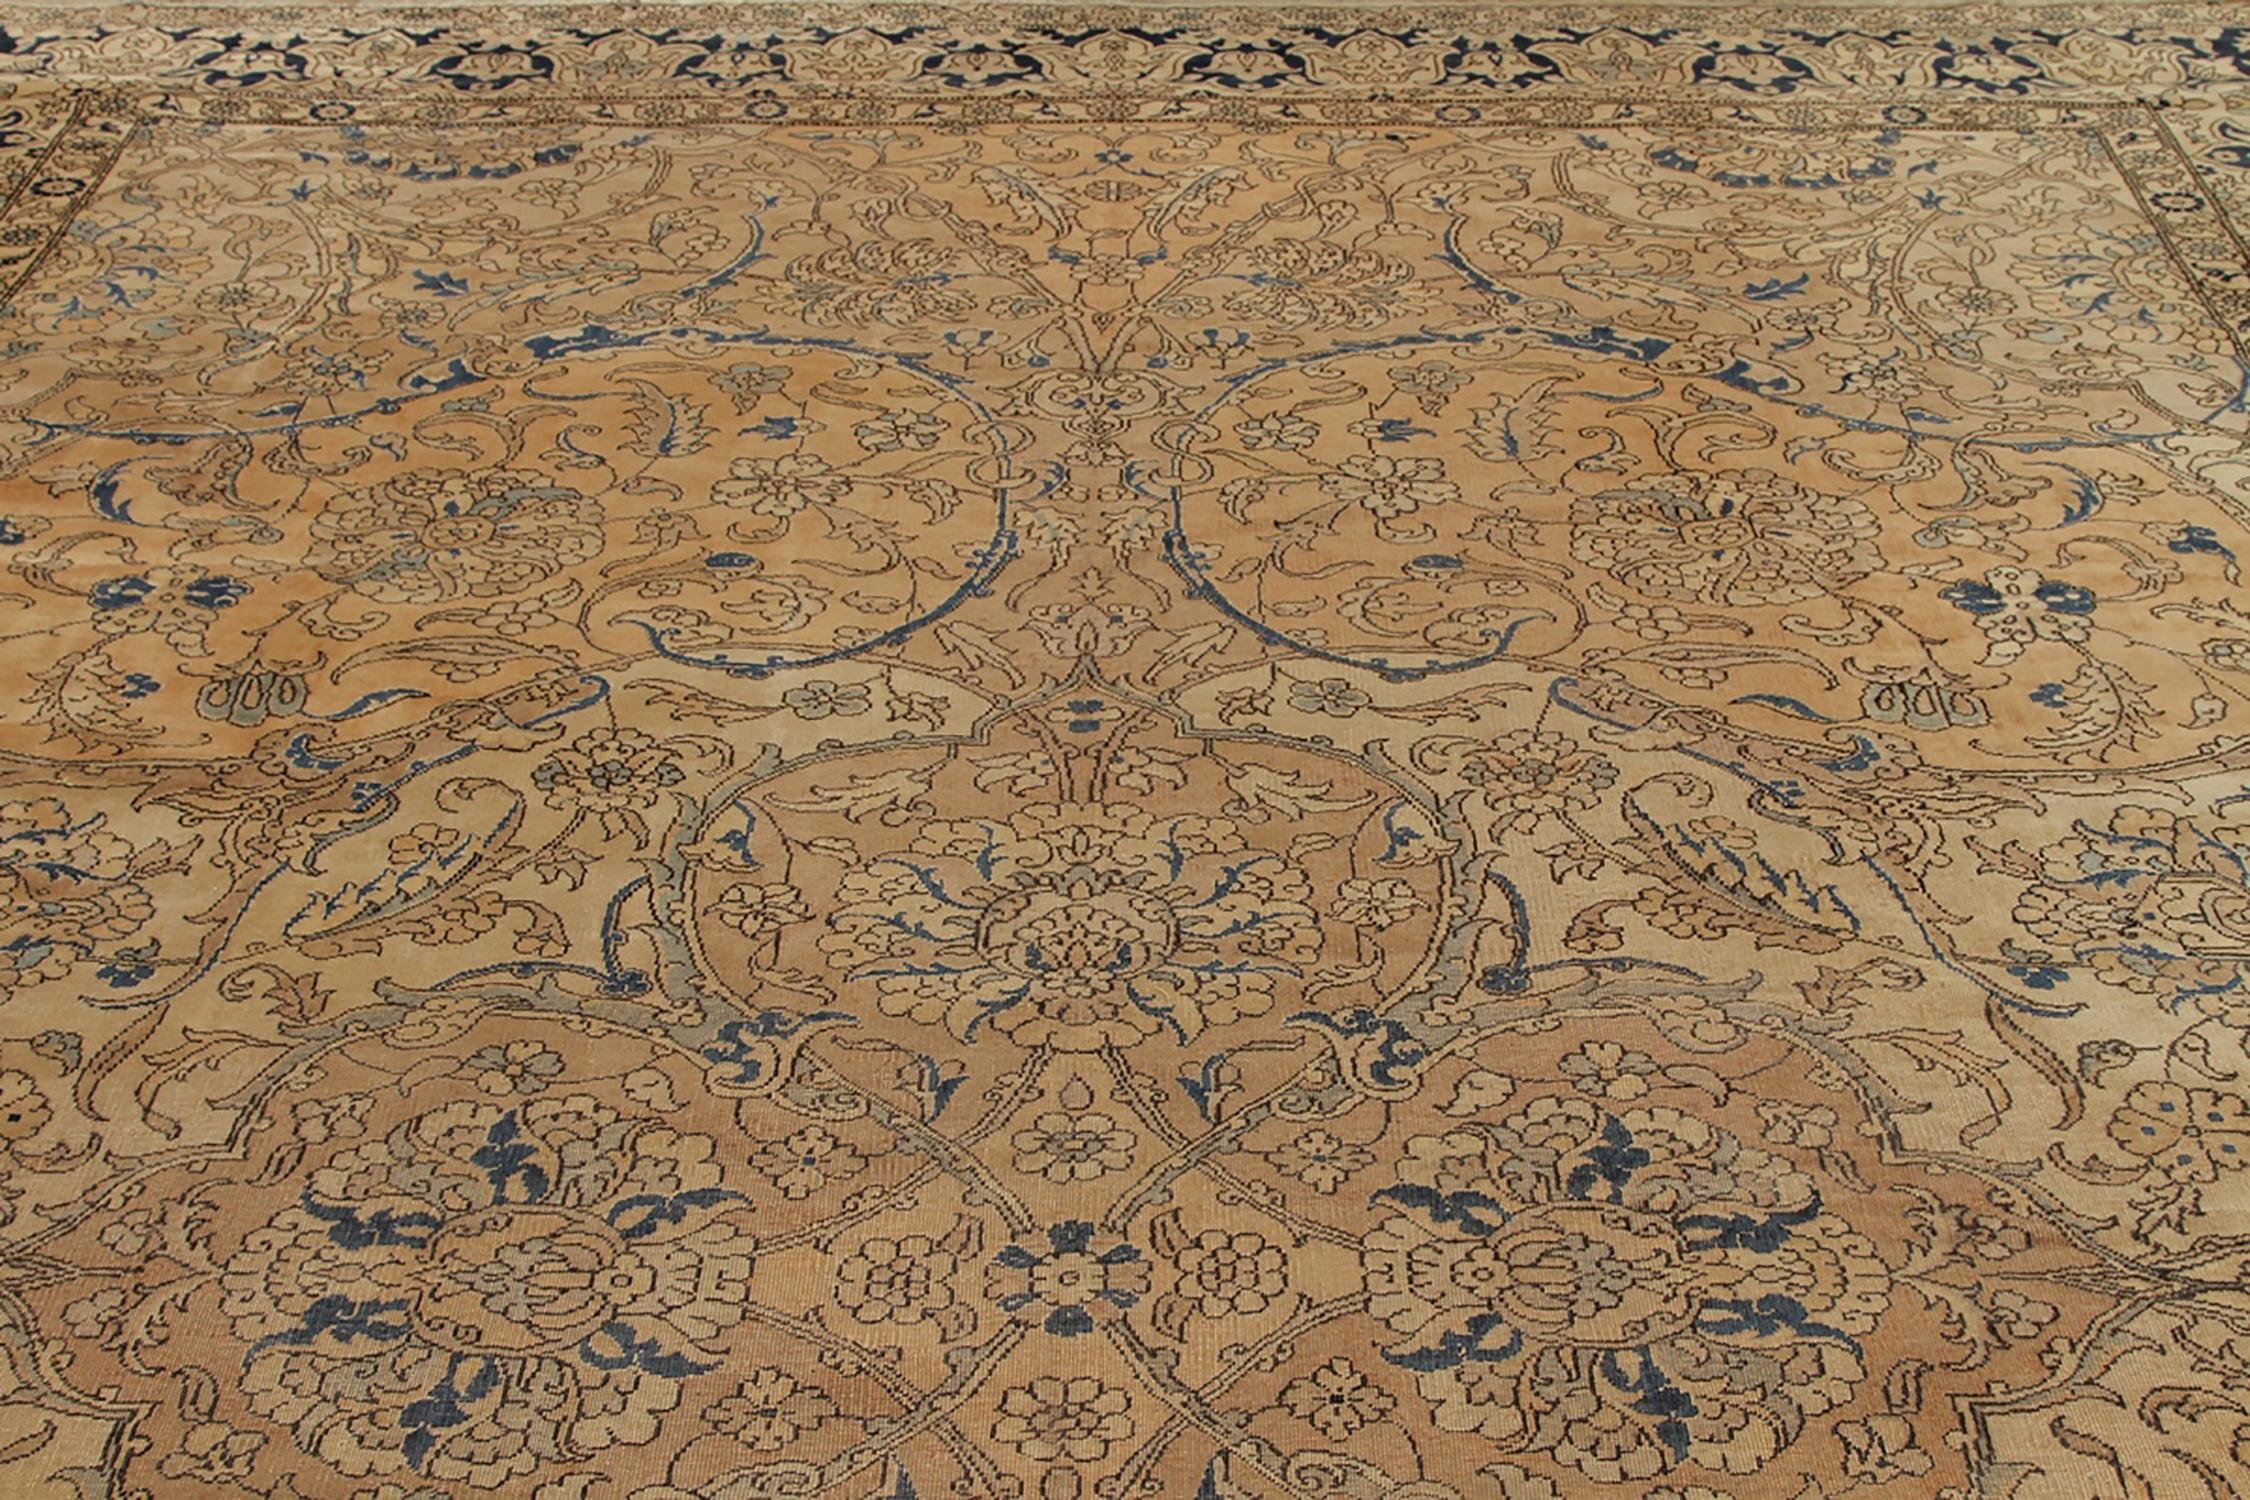 Hand knotted in wool originating from India circa 1890-1900, this 10 x 16 antique rug connotes a transitional Polonaise rug design, both celebrated among the most sought-after lineages of antique Indian rugs and seldom seen in this large size with